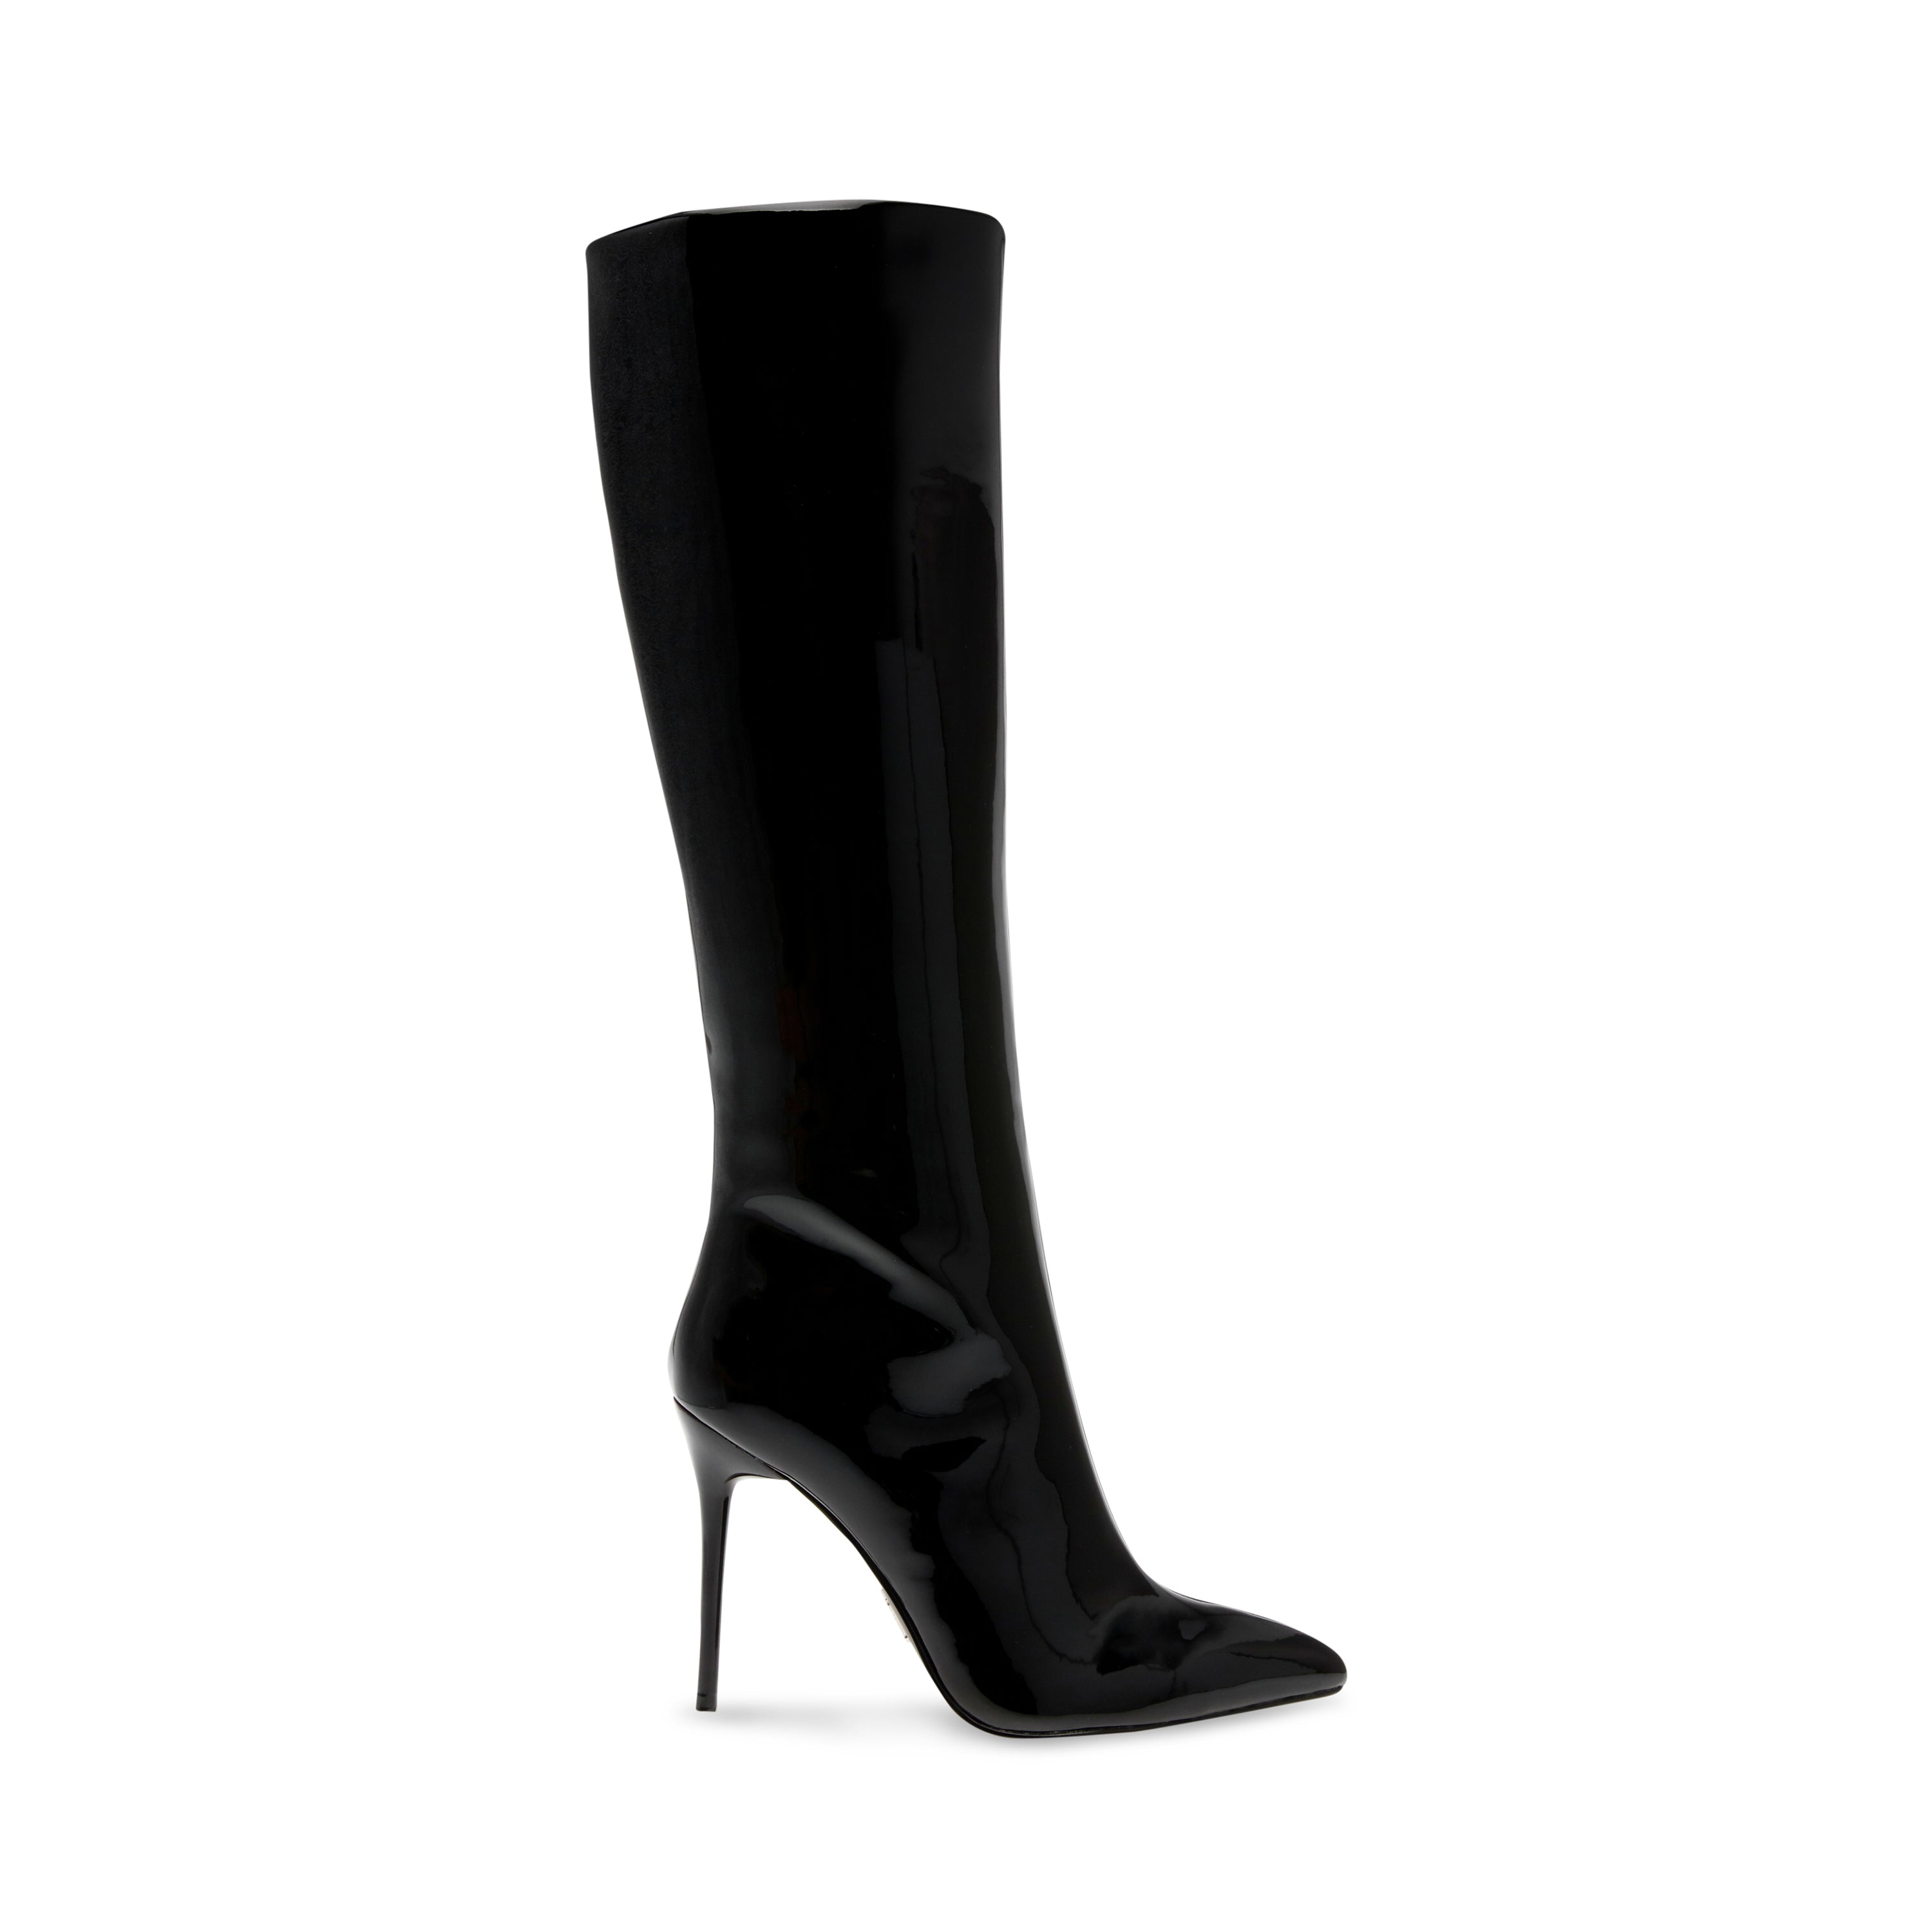 Lovable Boot Black Patent